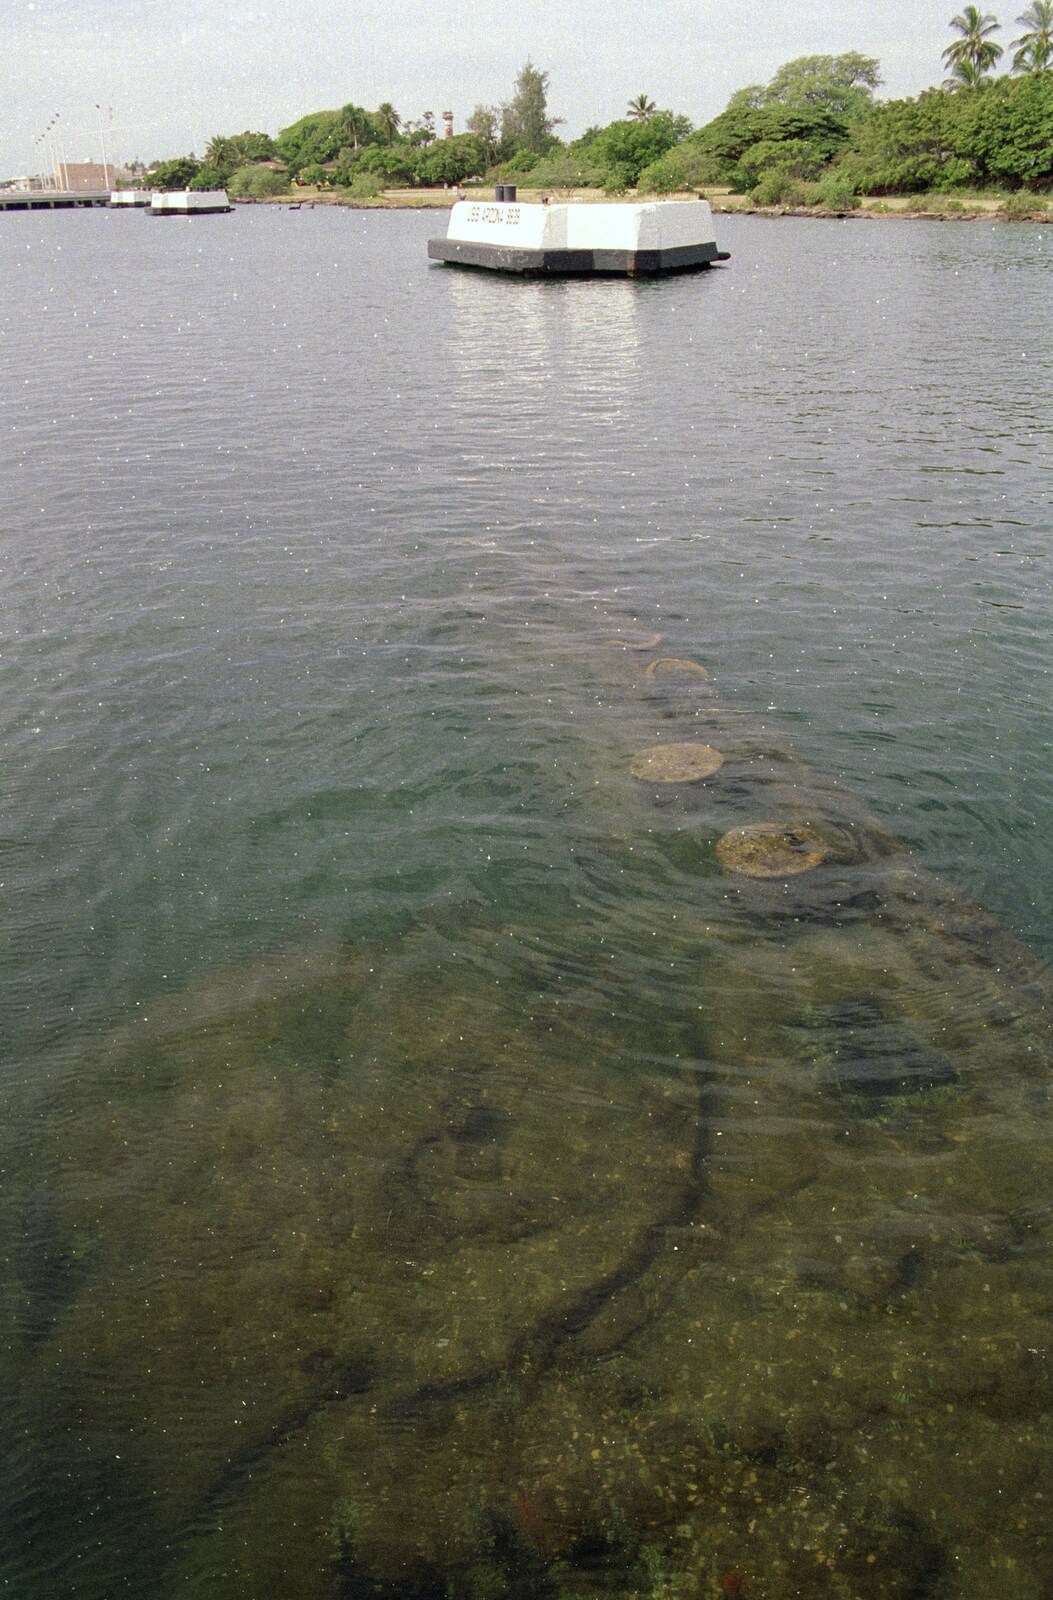 The wreck of the USS Arizona lies just beneath the water from A 747 Cockpit, Honolulu and Pearl Harbor, O'ahu, Hawai'i, United States - 20th November 1992